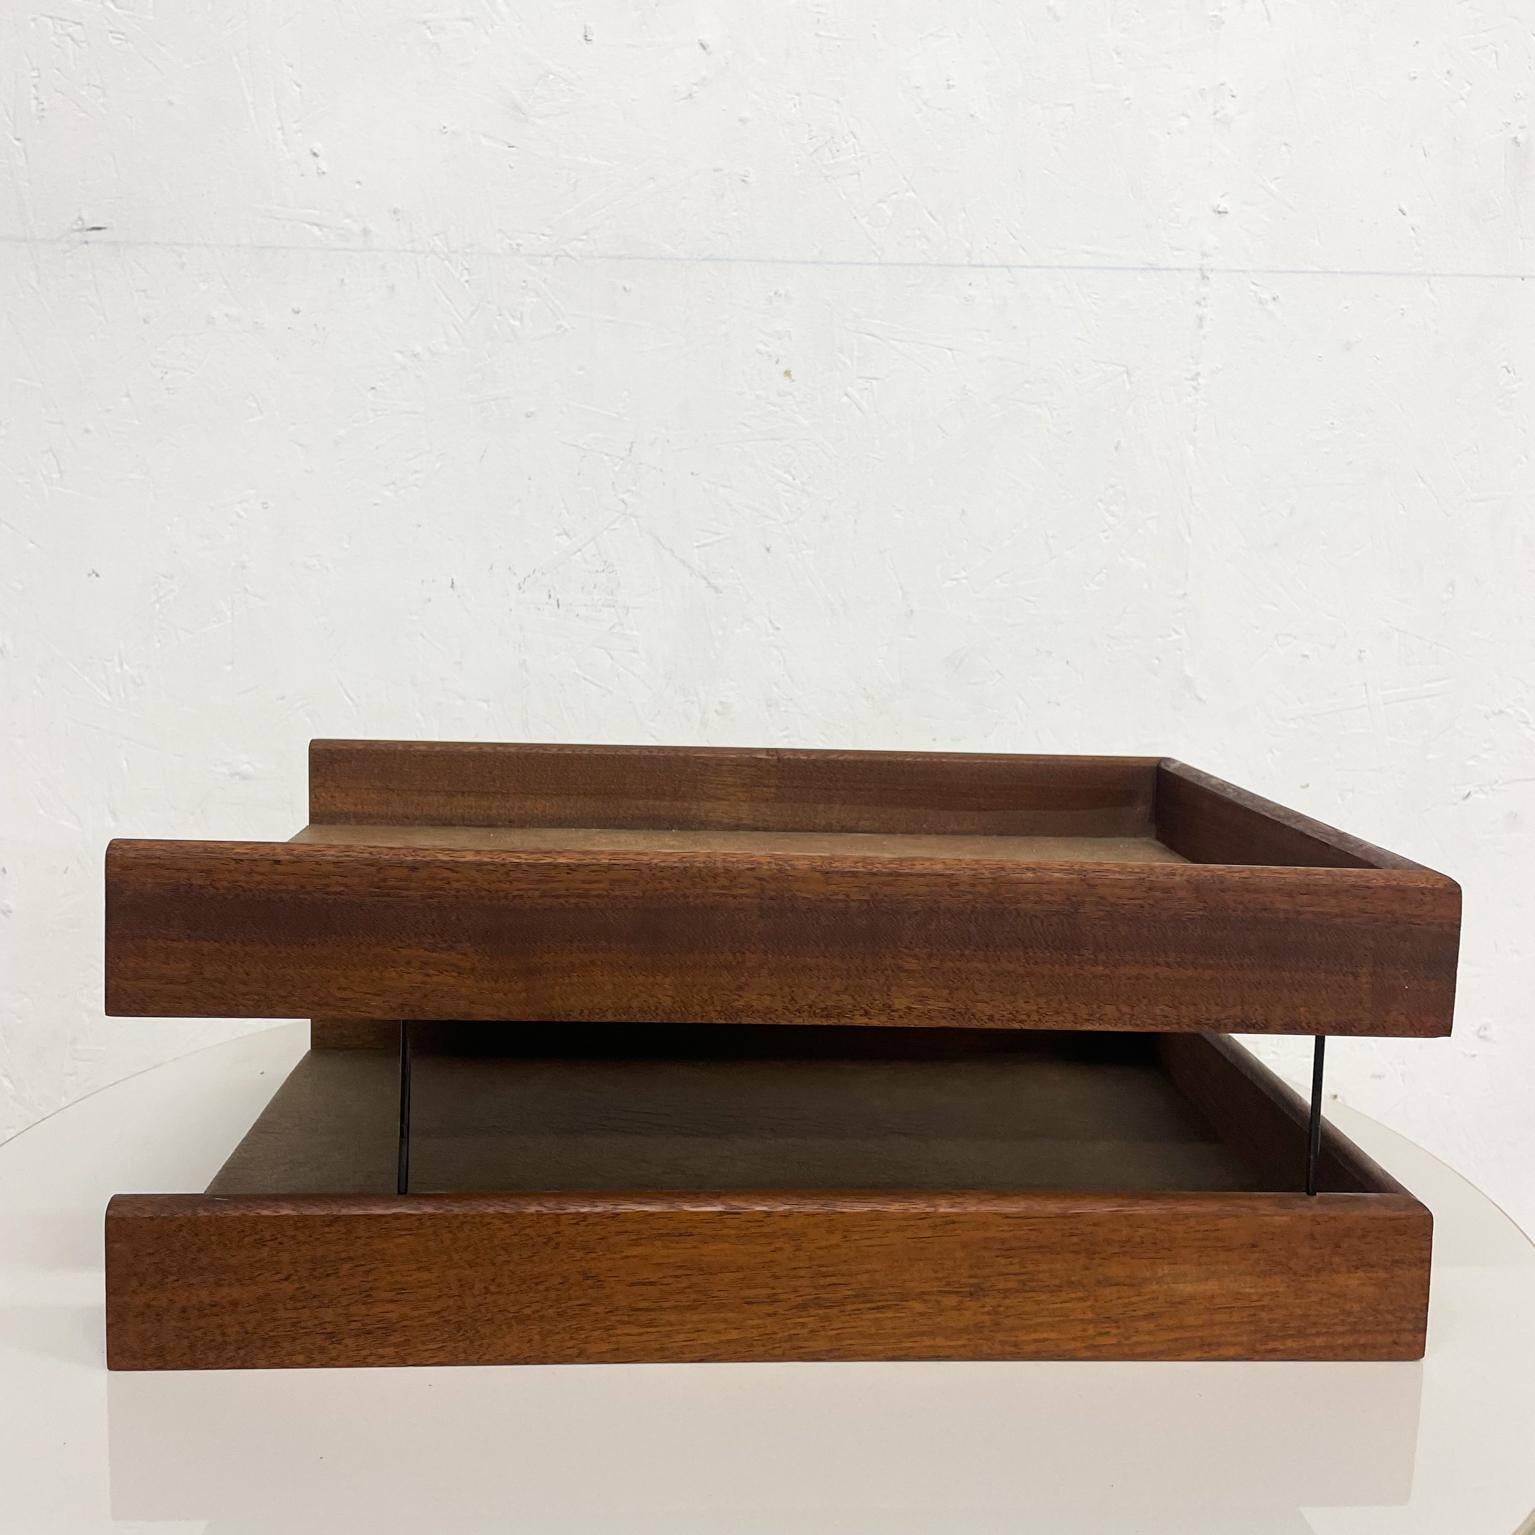 Late 20th Century 1970s Modern Two Tier Paper Tray Solid Walnut Wood and Bronze Desk Accessory